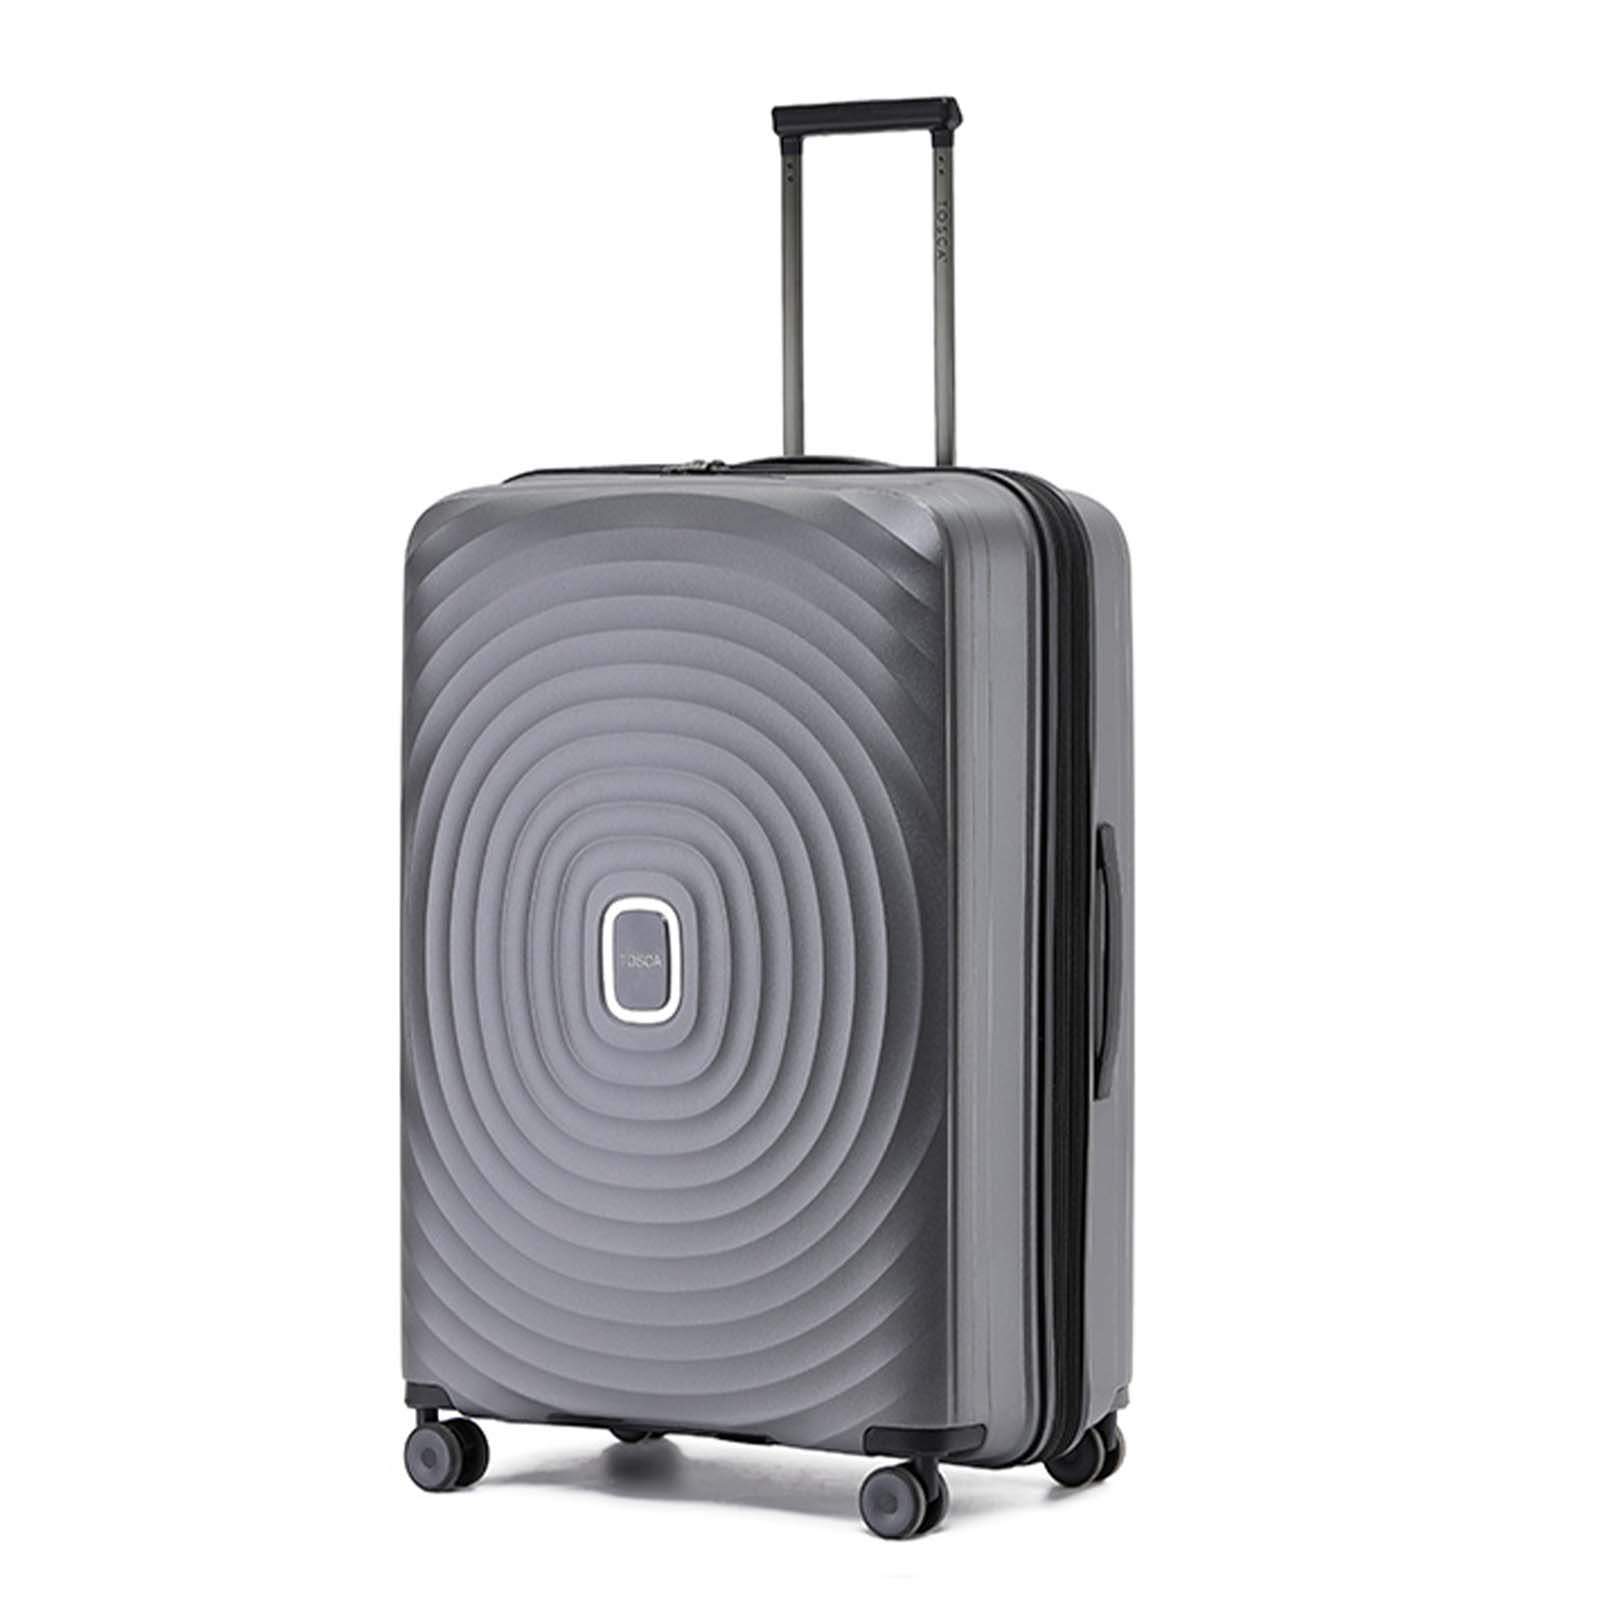 tosca-eclipse-4-wheel-77cm-large-suitcase-charcoal-front-angle